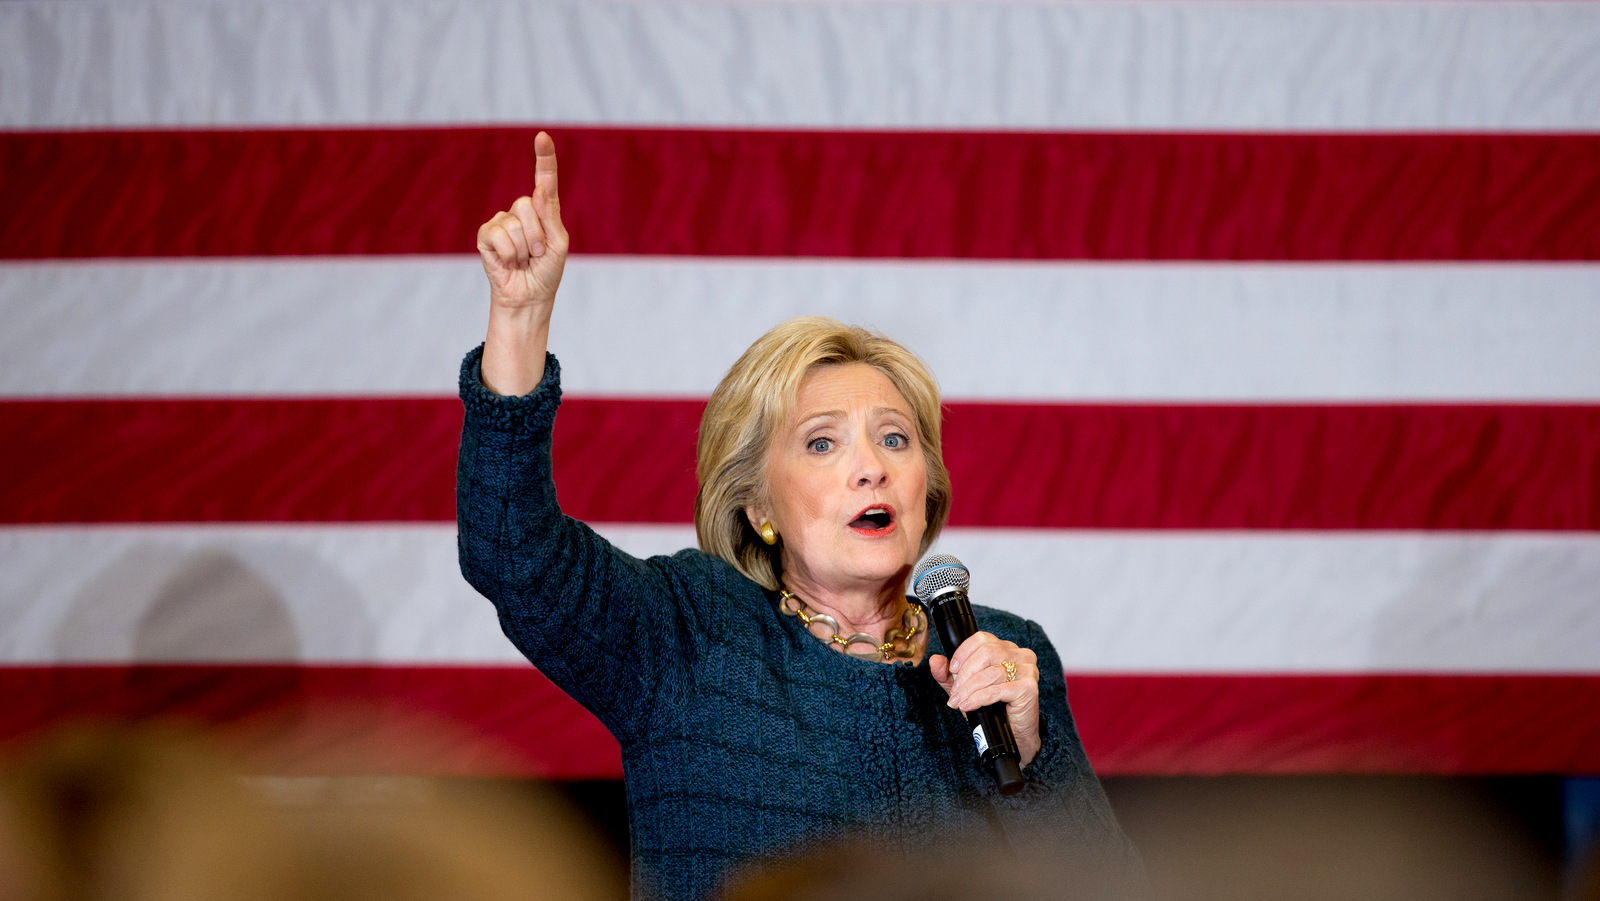 Democratic presidential candidate Hillary Clinton speaks at a rally at BR Miller Middle School in Marshalltown, Iowa, Tuesday, Jan. 26, 2016. (AP Photo/Andrew Harnik)